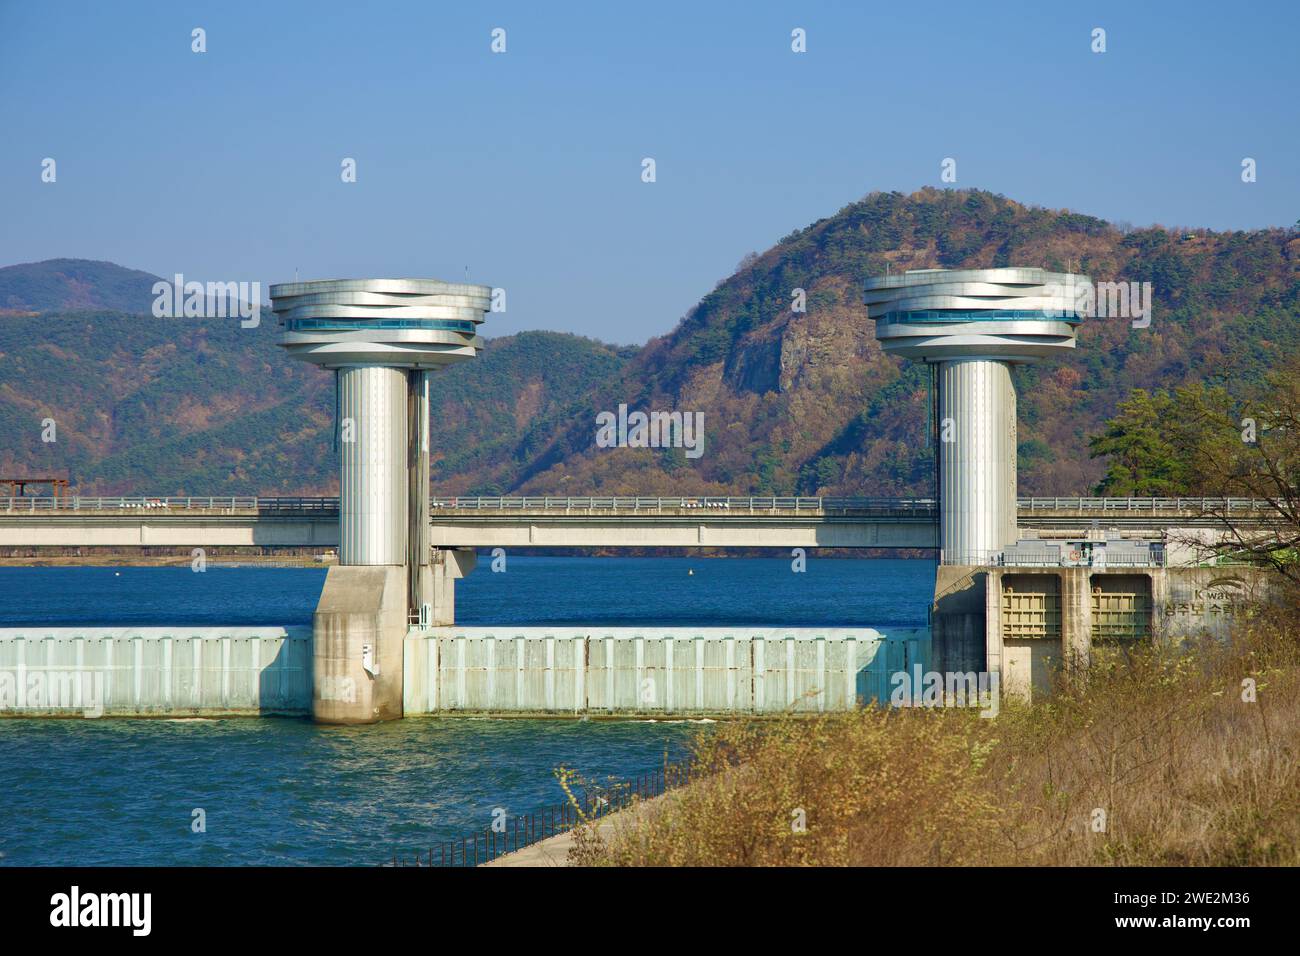 Sangju City, South Korea - November 18th, 2023: A detailed view of two of the Sangju Weir's iconic towers, with a rugged mountain face providing a dra Stock Photo